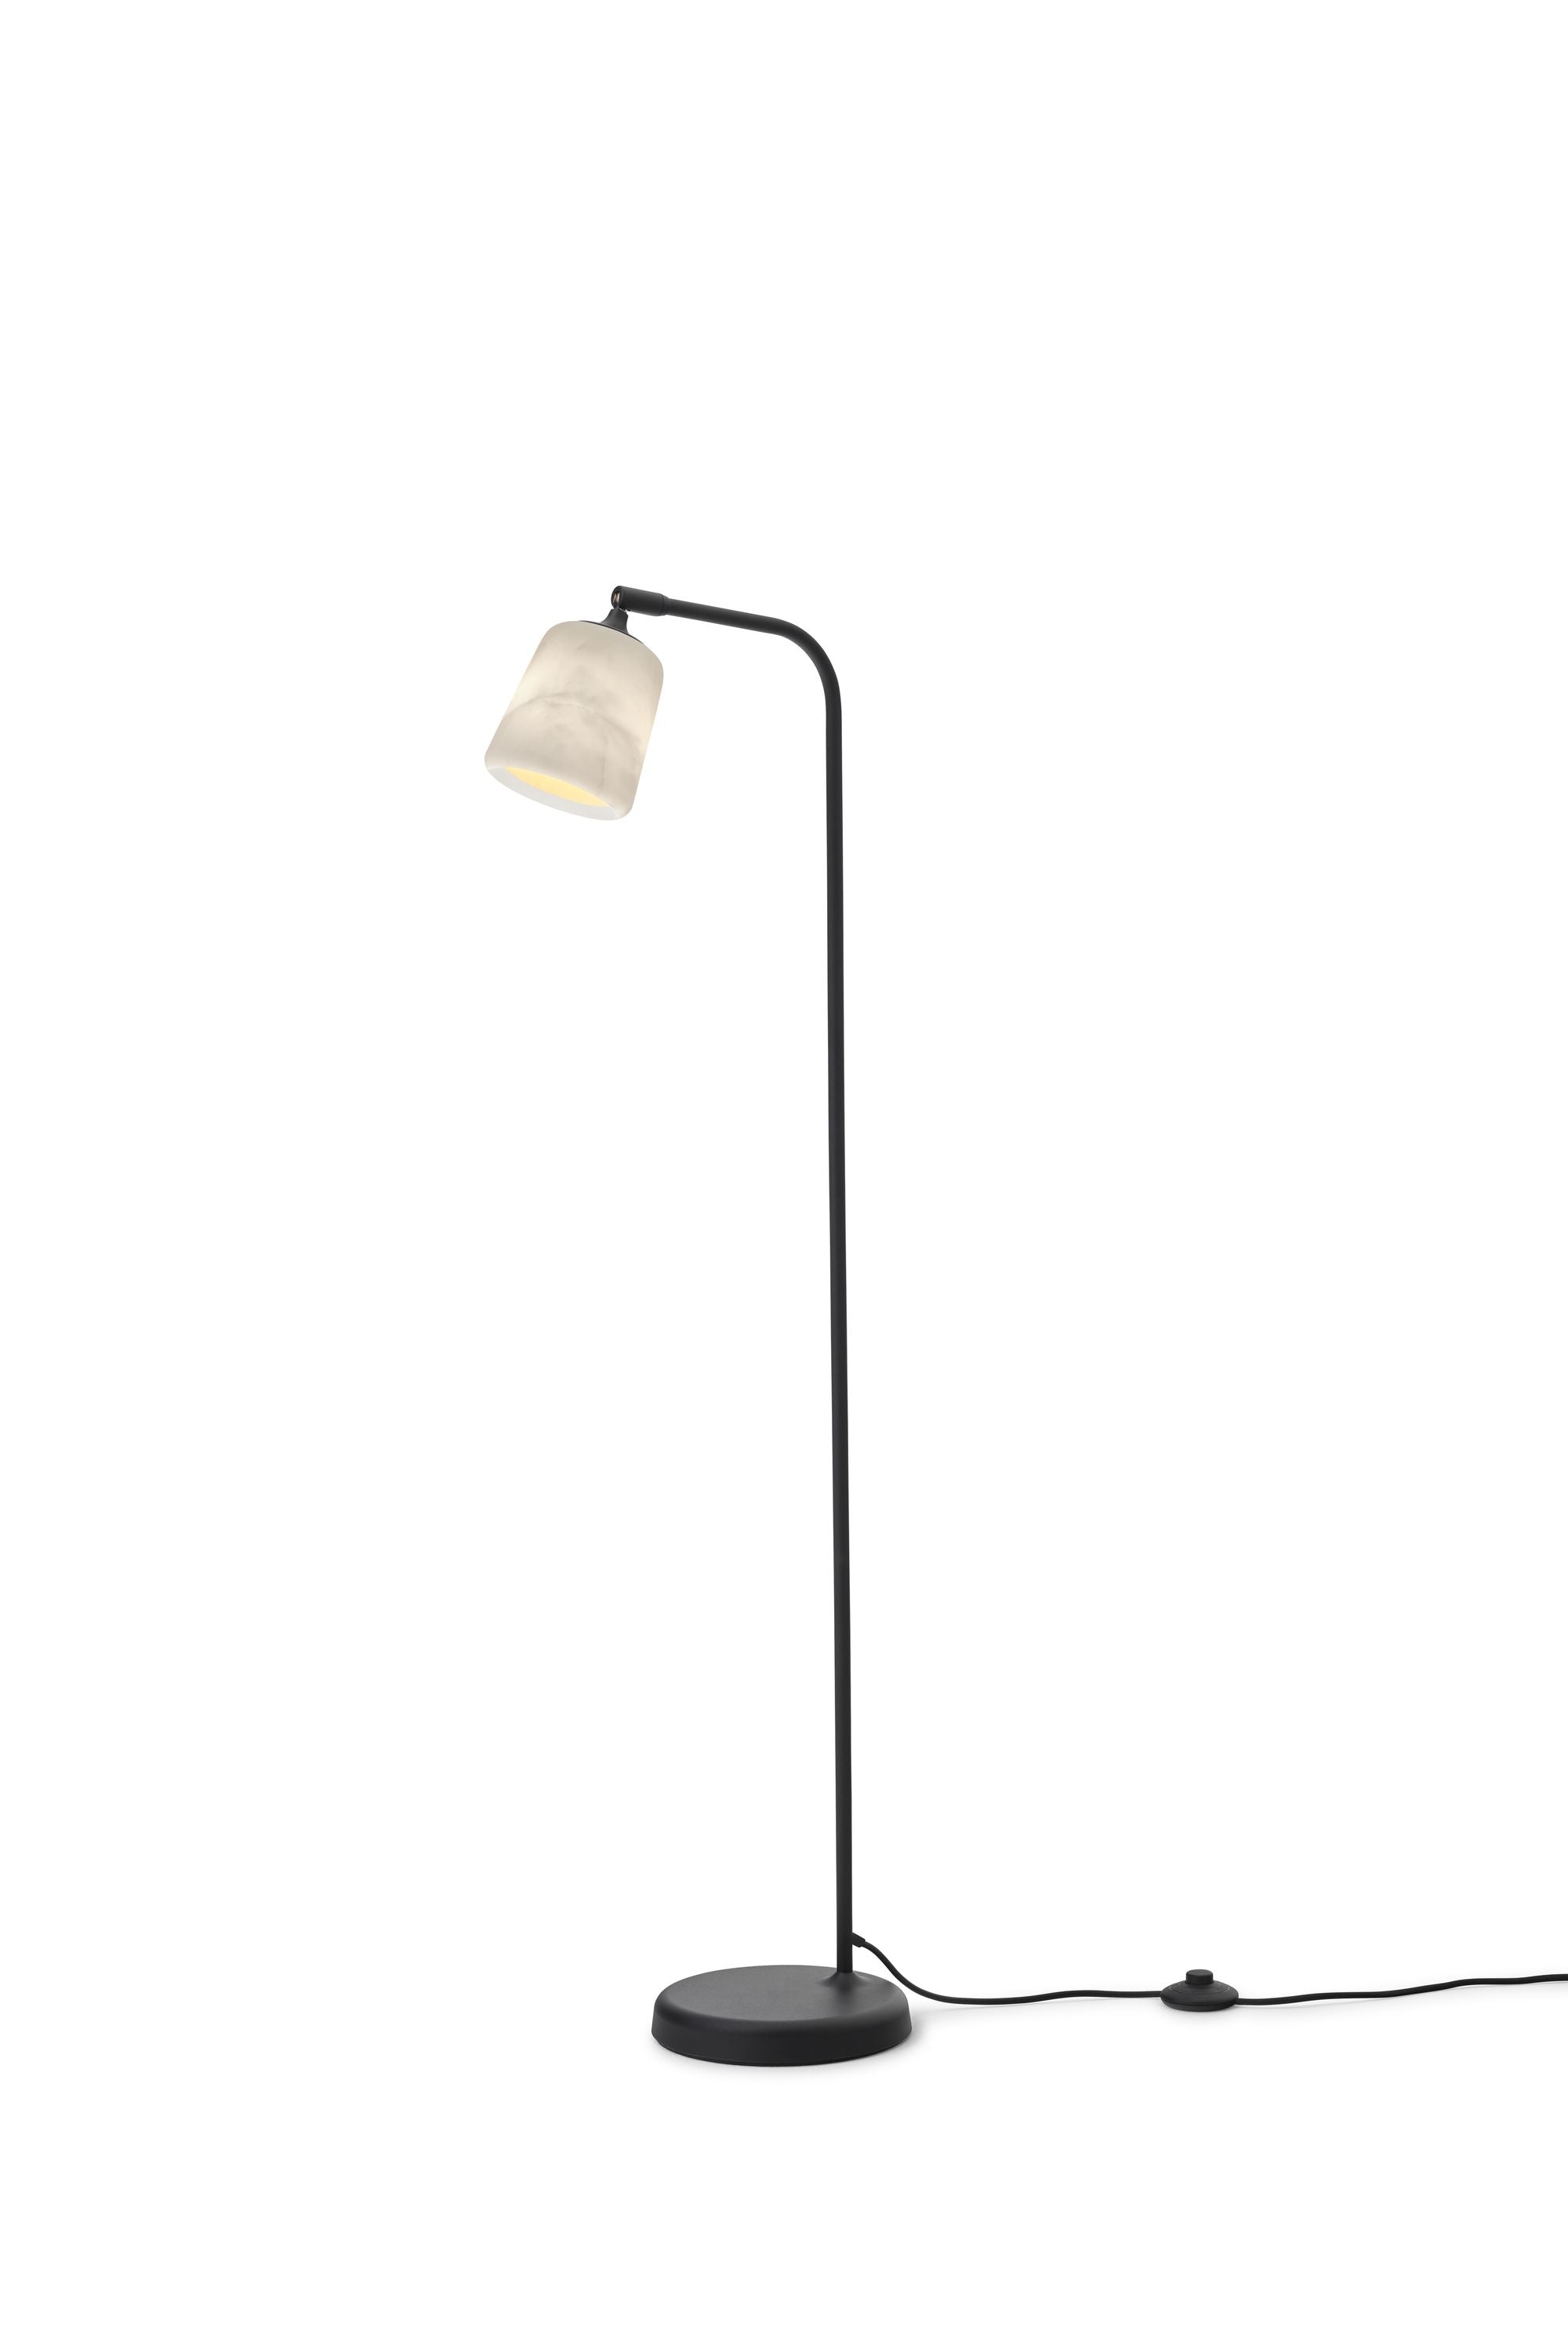 New Works Material Floor Lamp, The Black Sheep